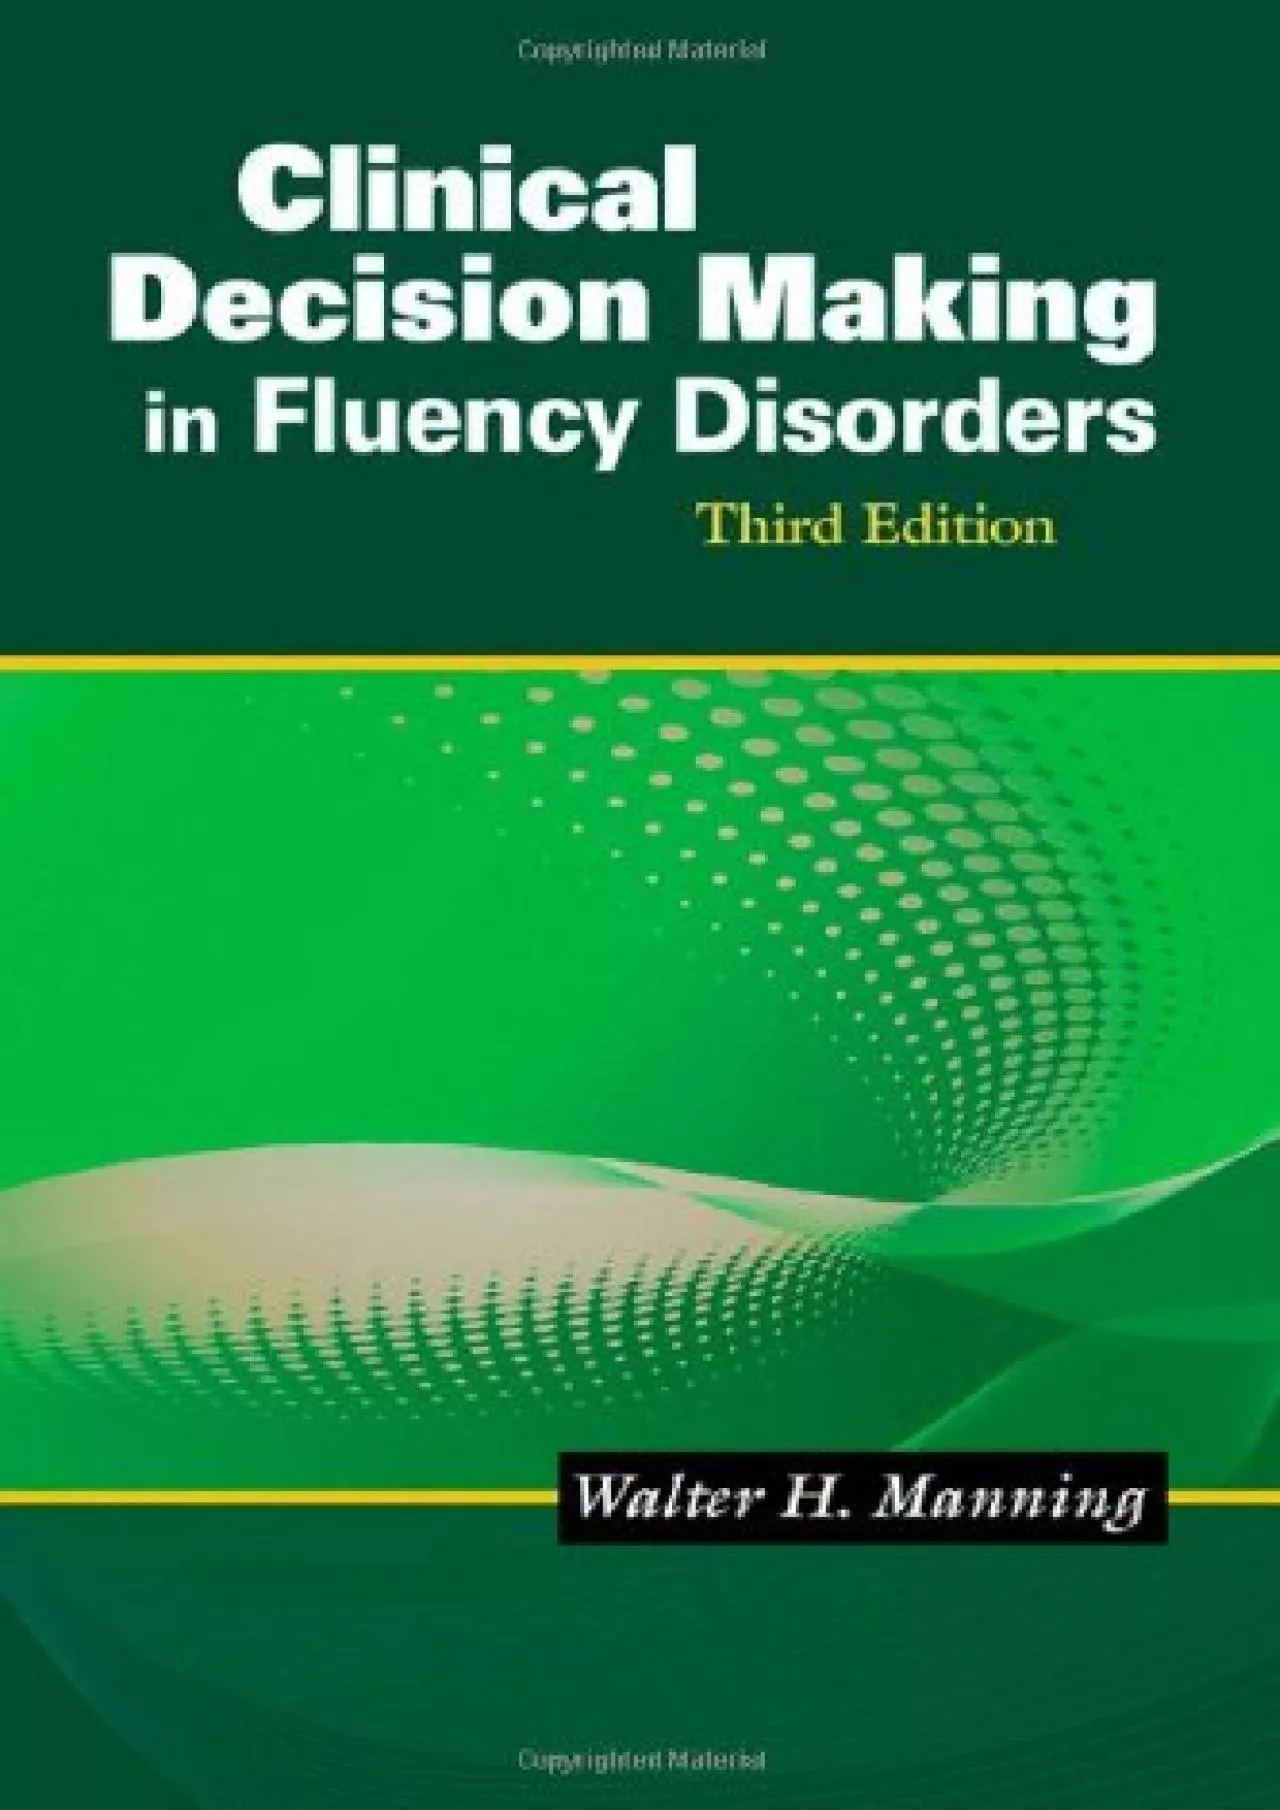 (BOOK)-Clinical Decision Making in Fluency Disorders